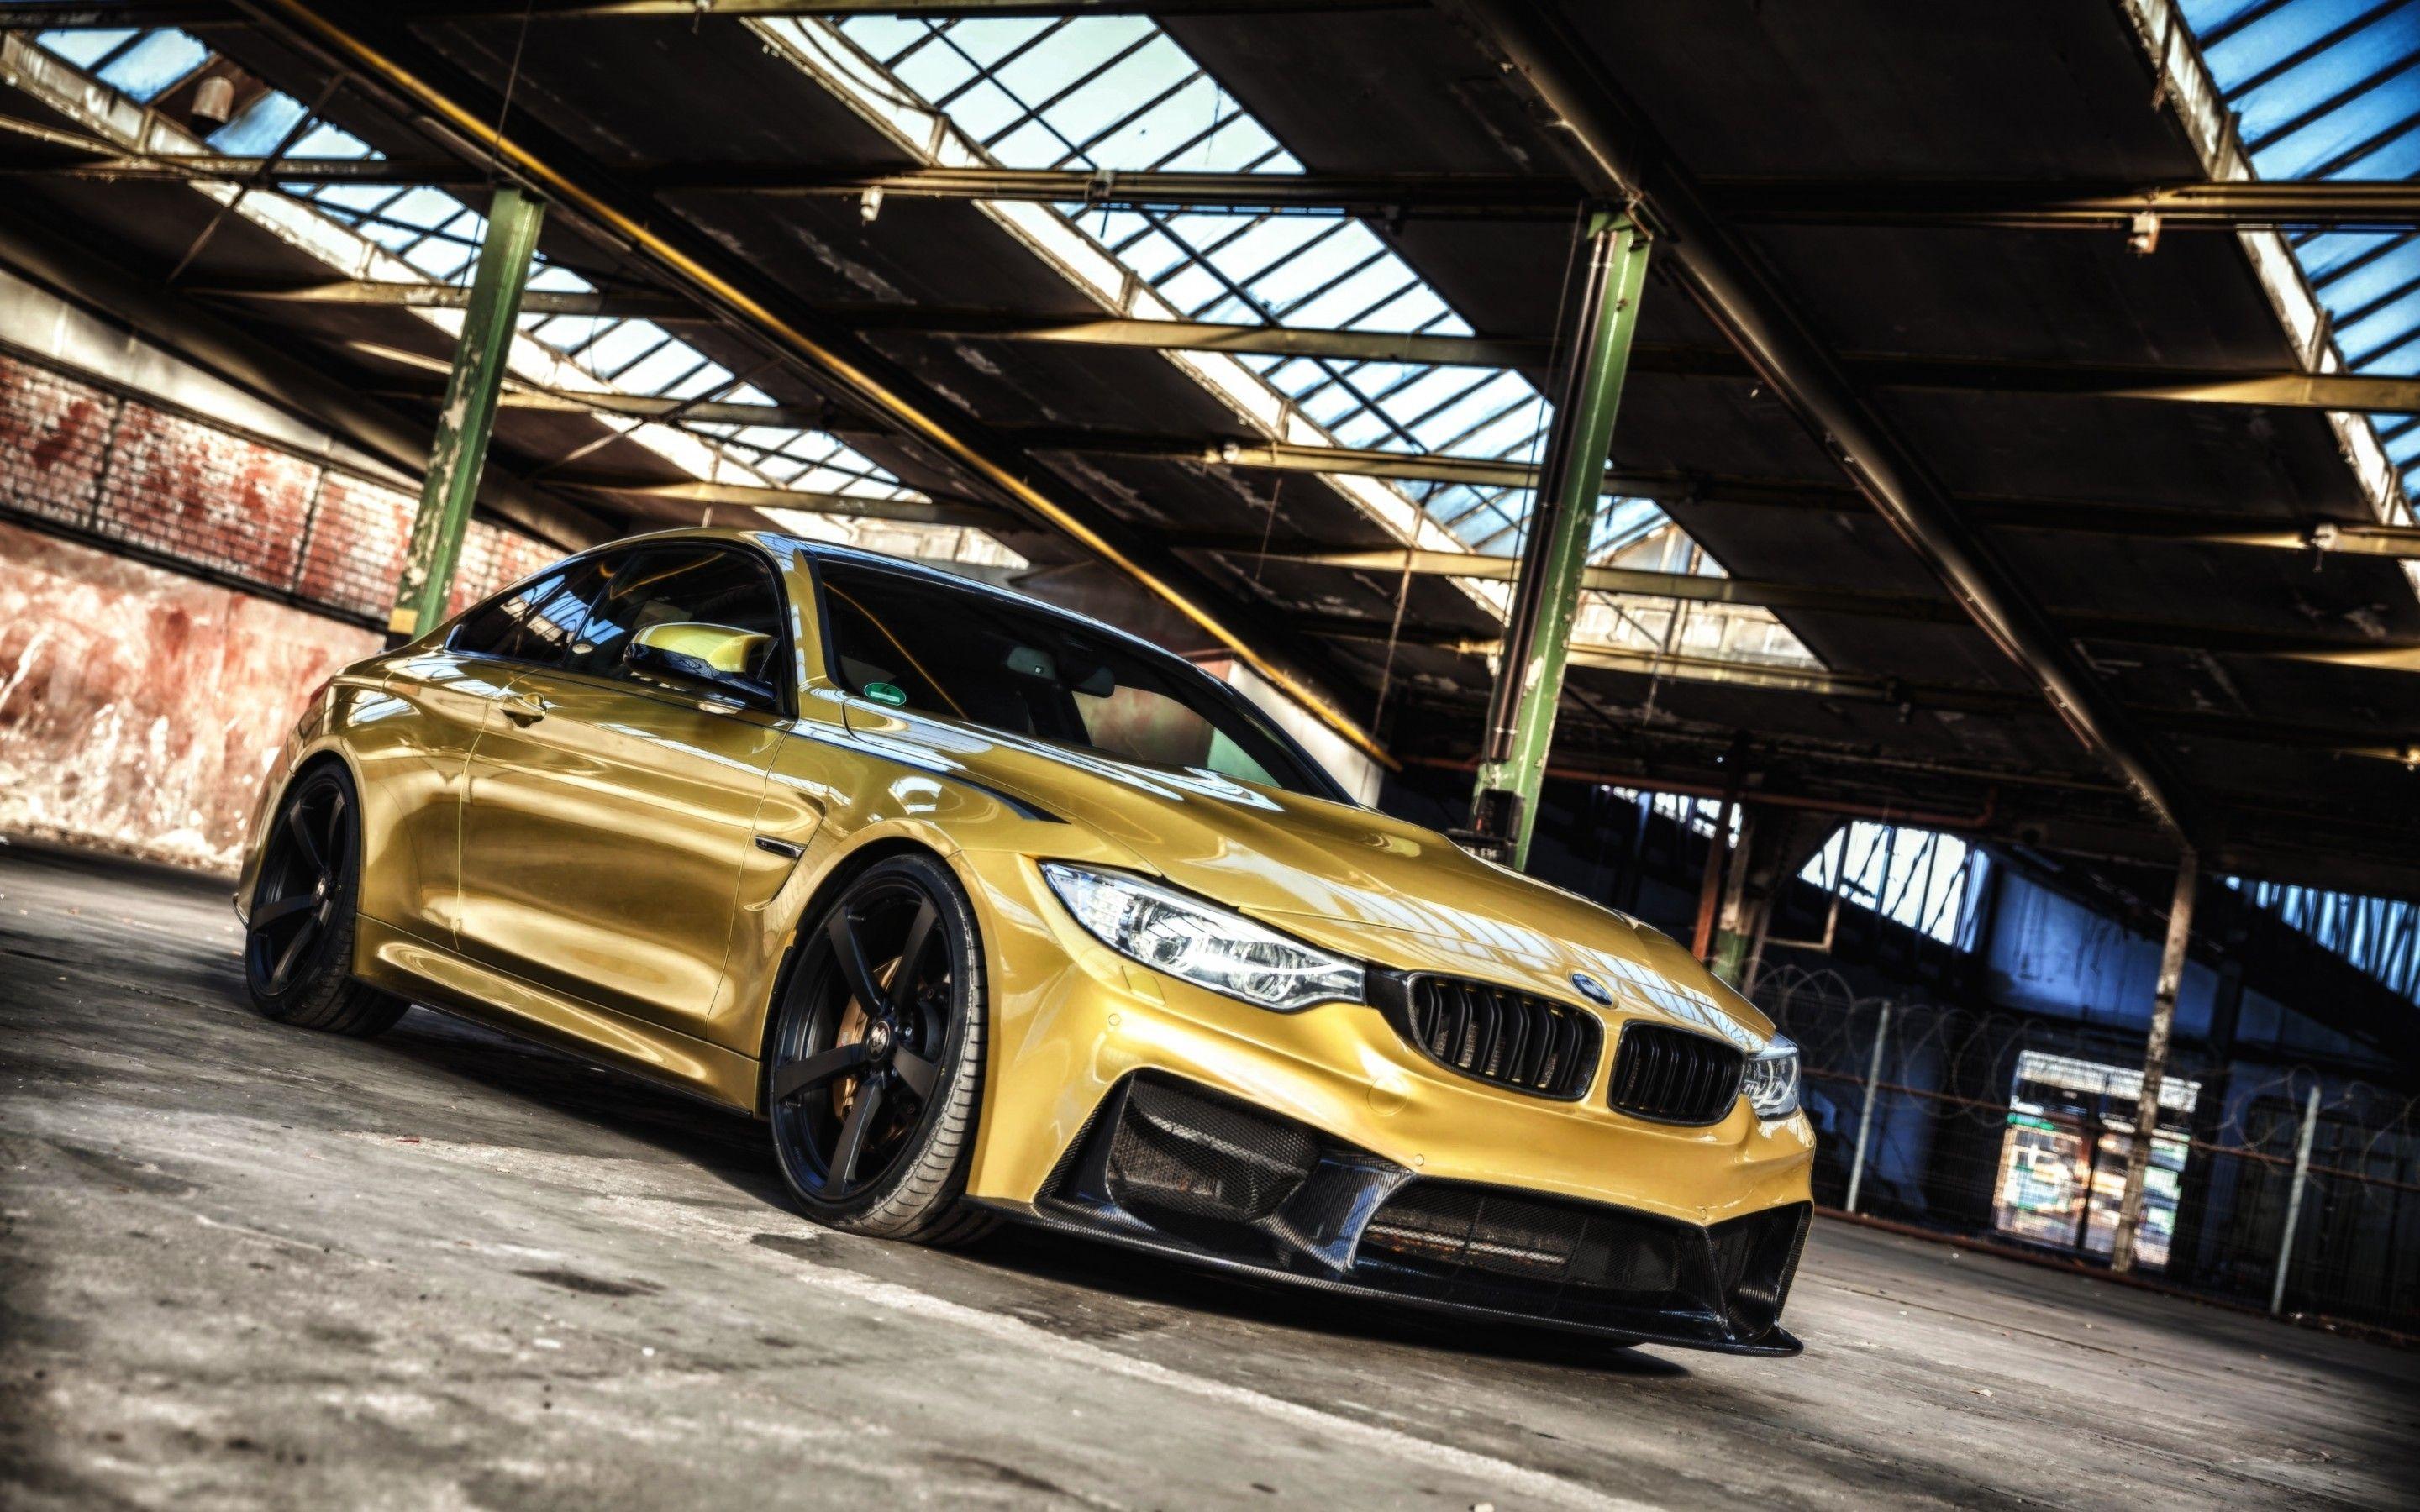 Download 2880x1800 Bmw M Yellow, Reflection, Luxury, Cars